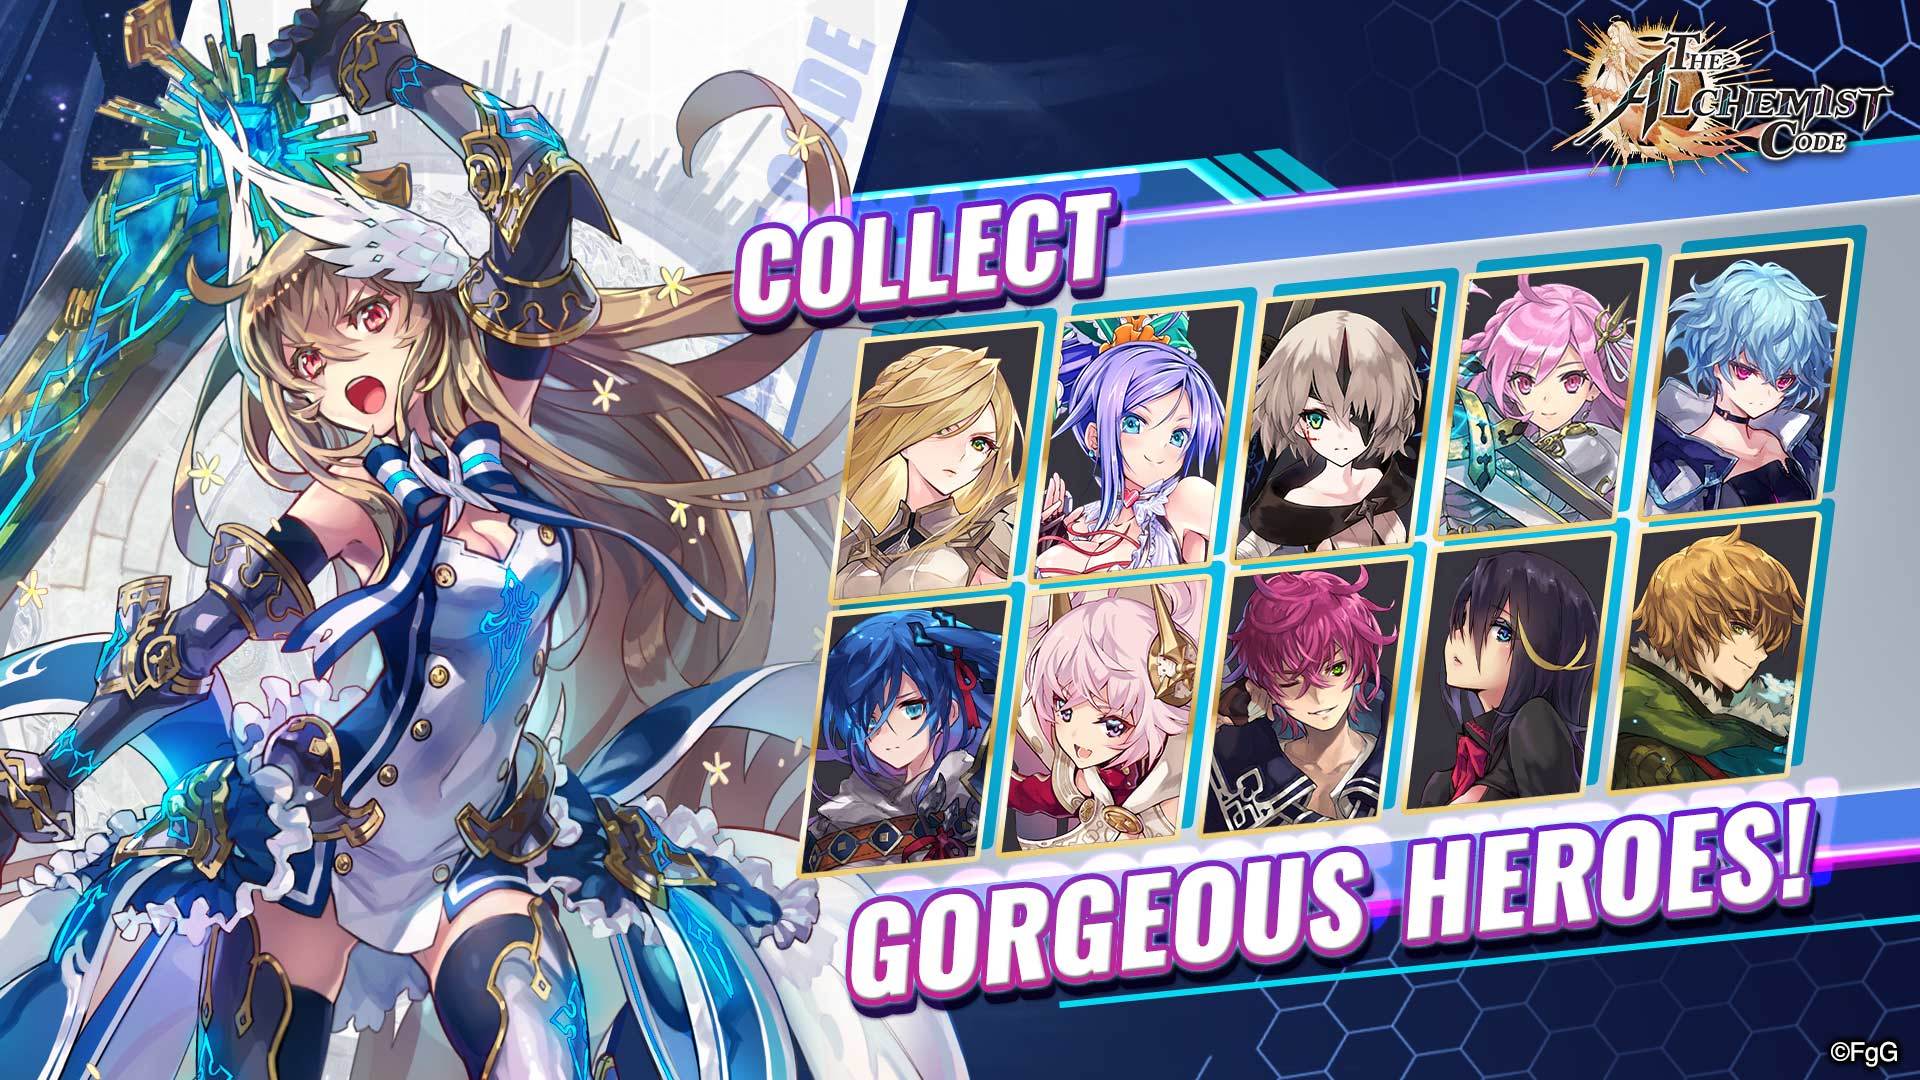 The Alchemist Code - Fate/stay night invades popular mobile strategy RPG -  MMO Culture